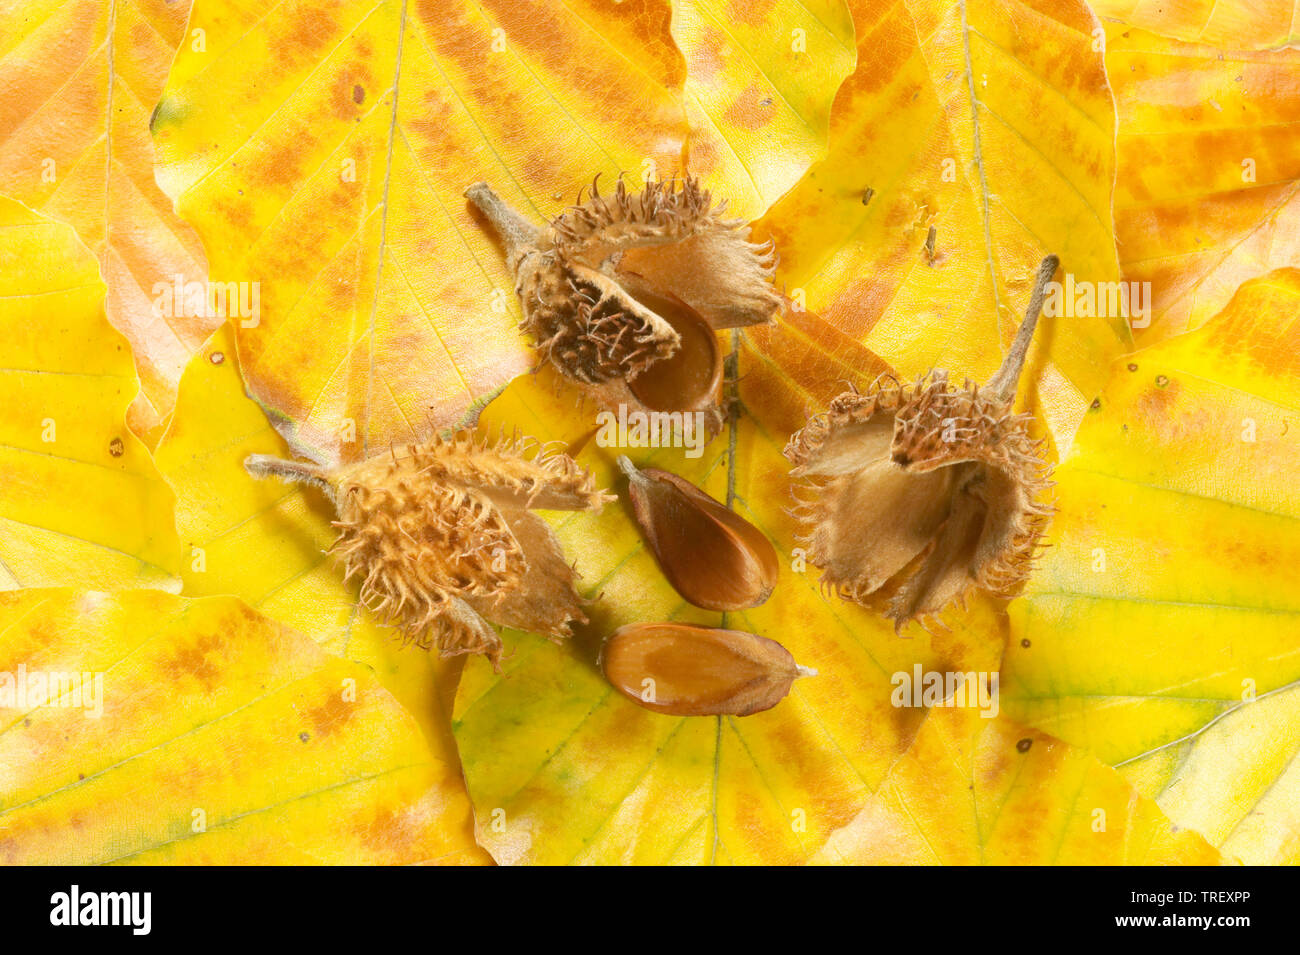 European Beech, Common Beech (Fagus sylvatica). Nut cupules and nuts on autumn leaves. Germany Stock Photo